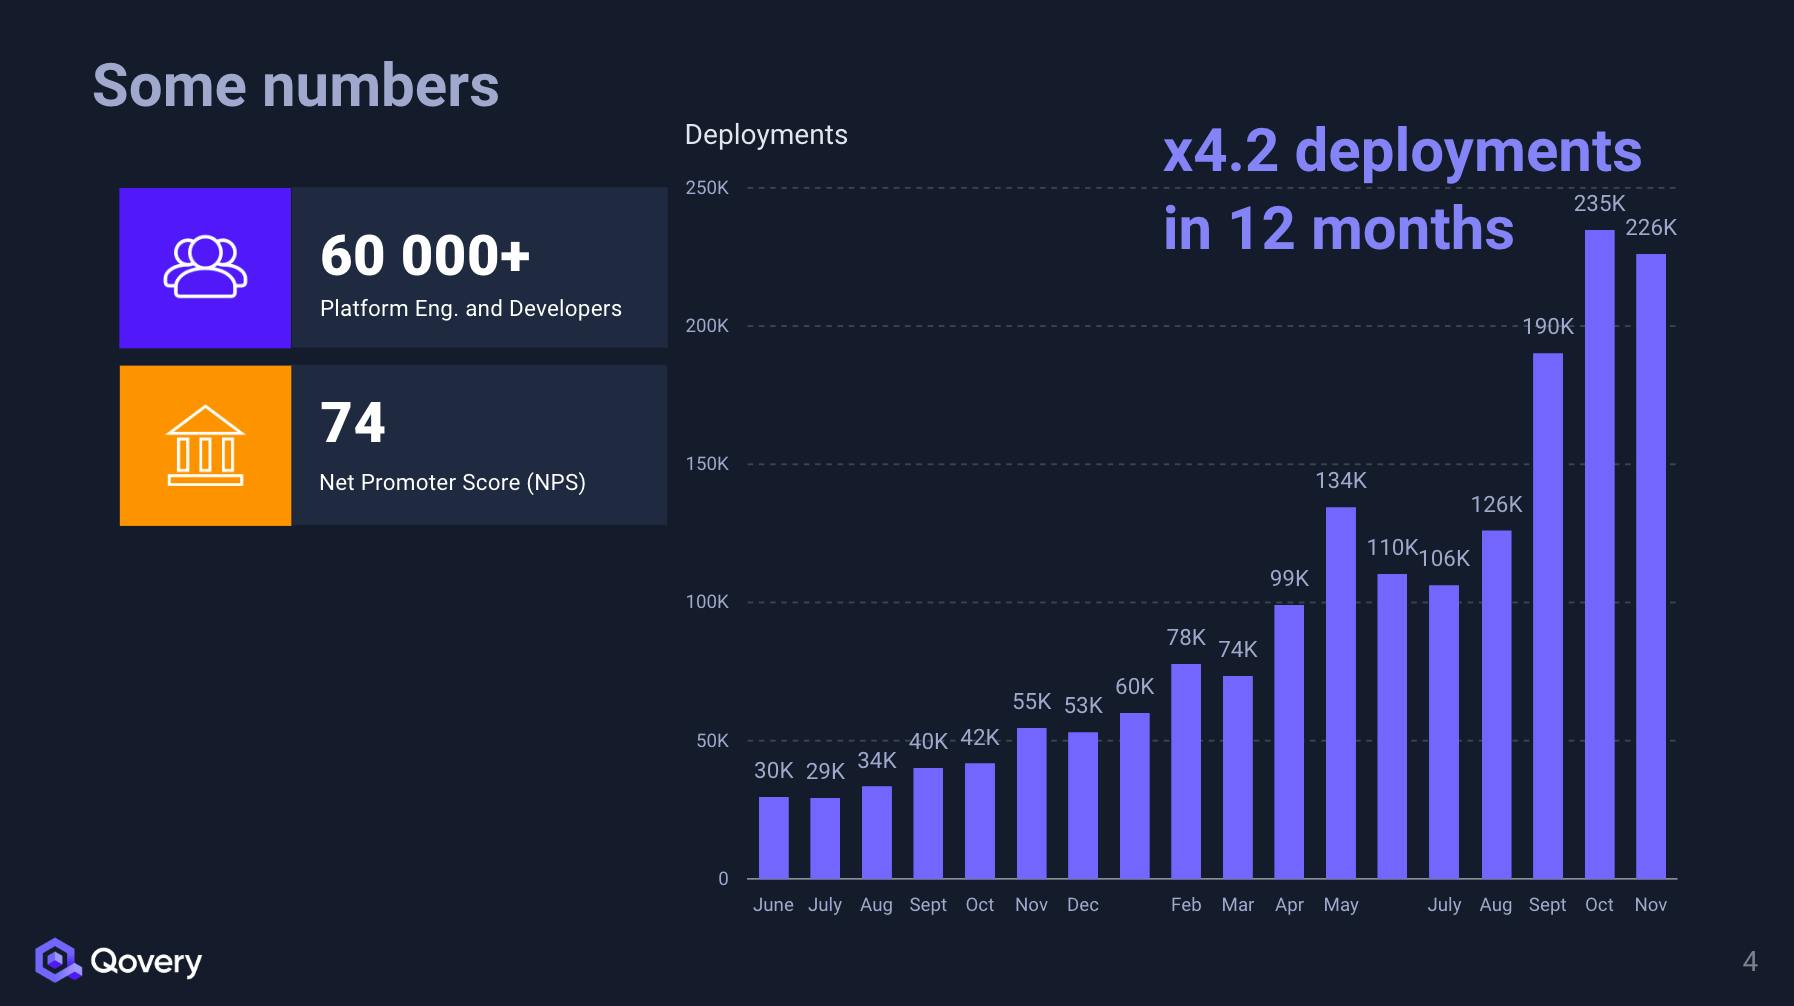 Some numbers from Qovery - 60k+ Platform Engineers and Developers + NPS 74 + 4.2x Deployment growth in 12 months